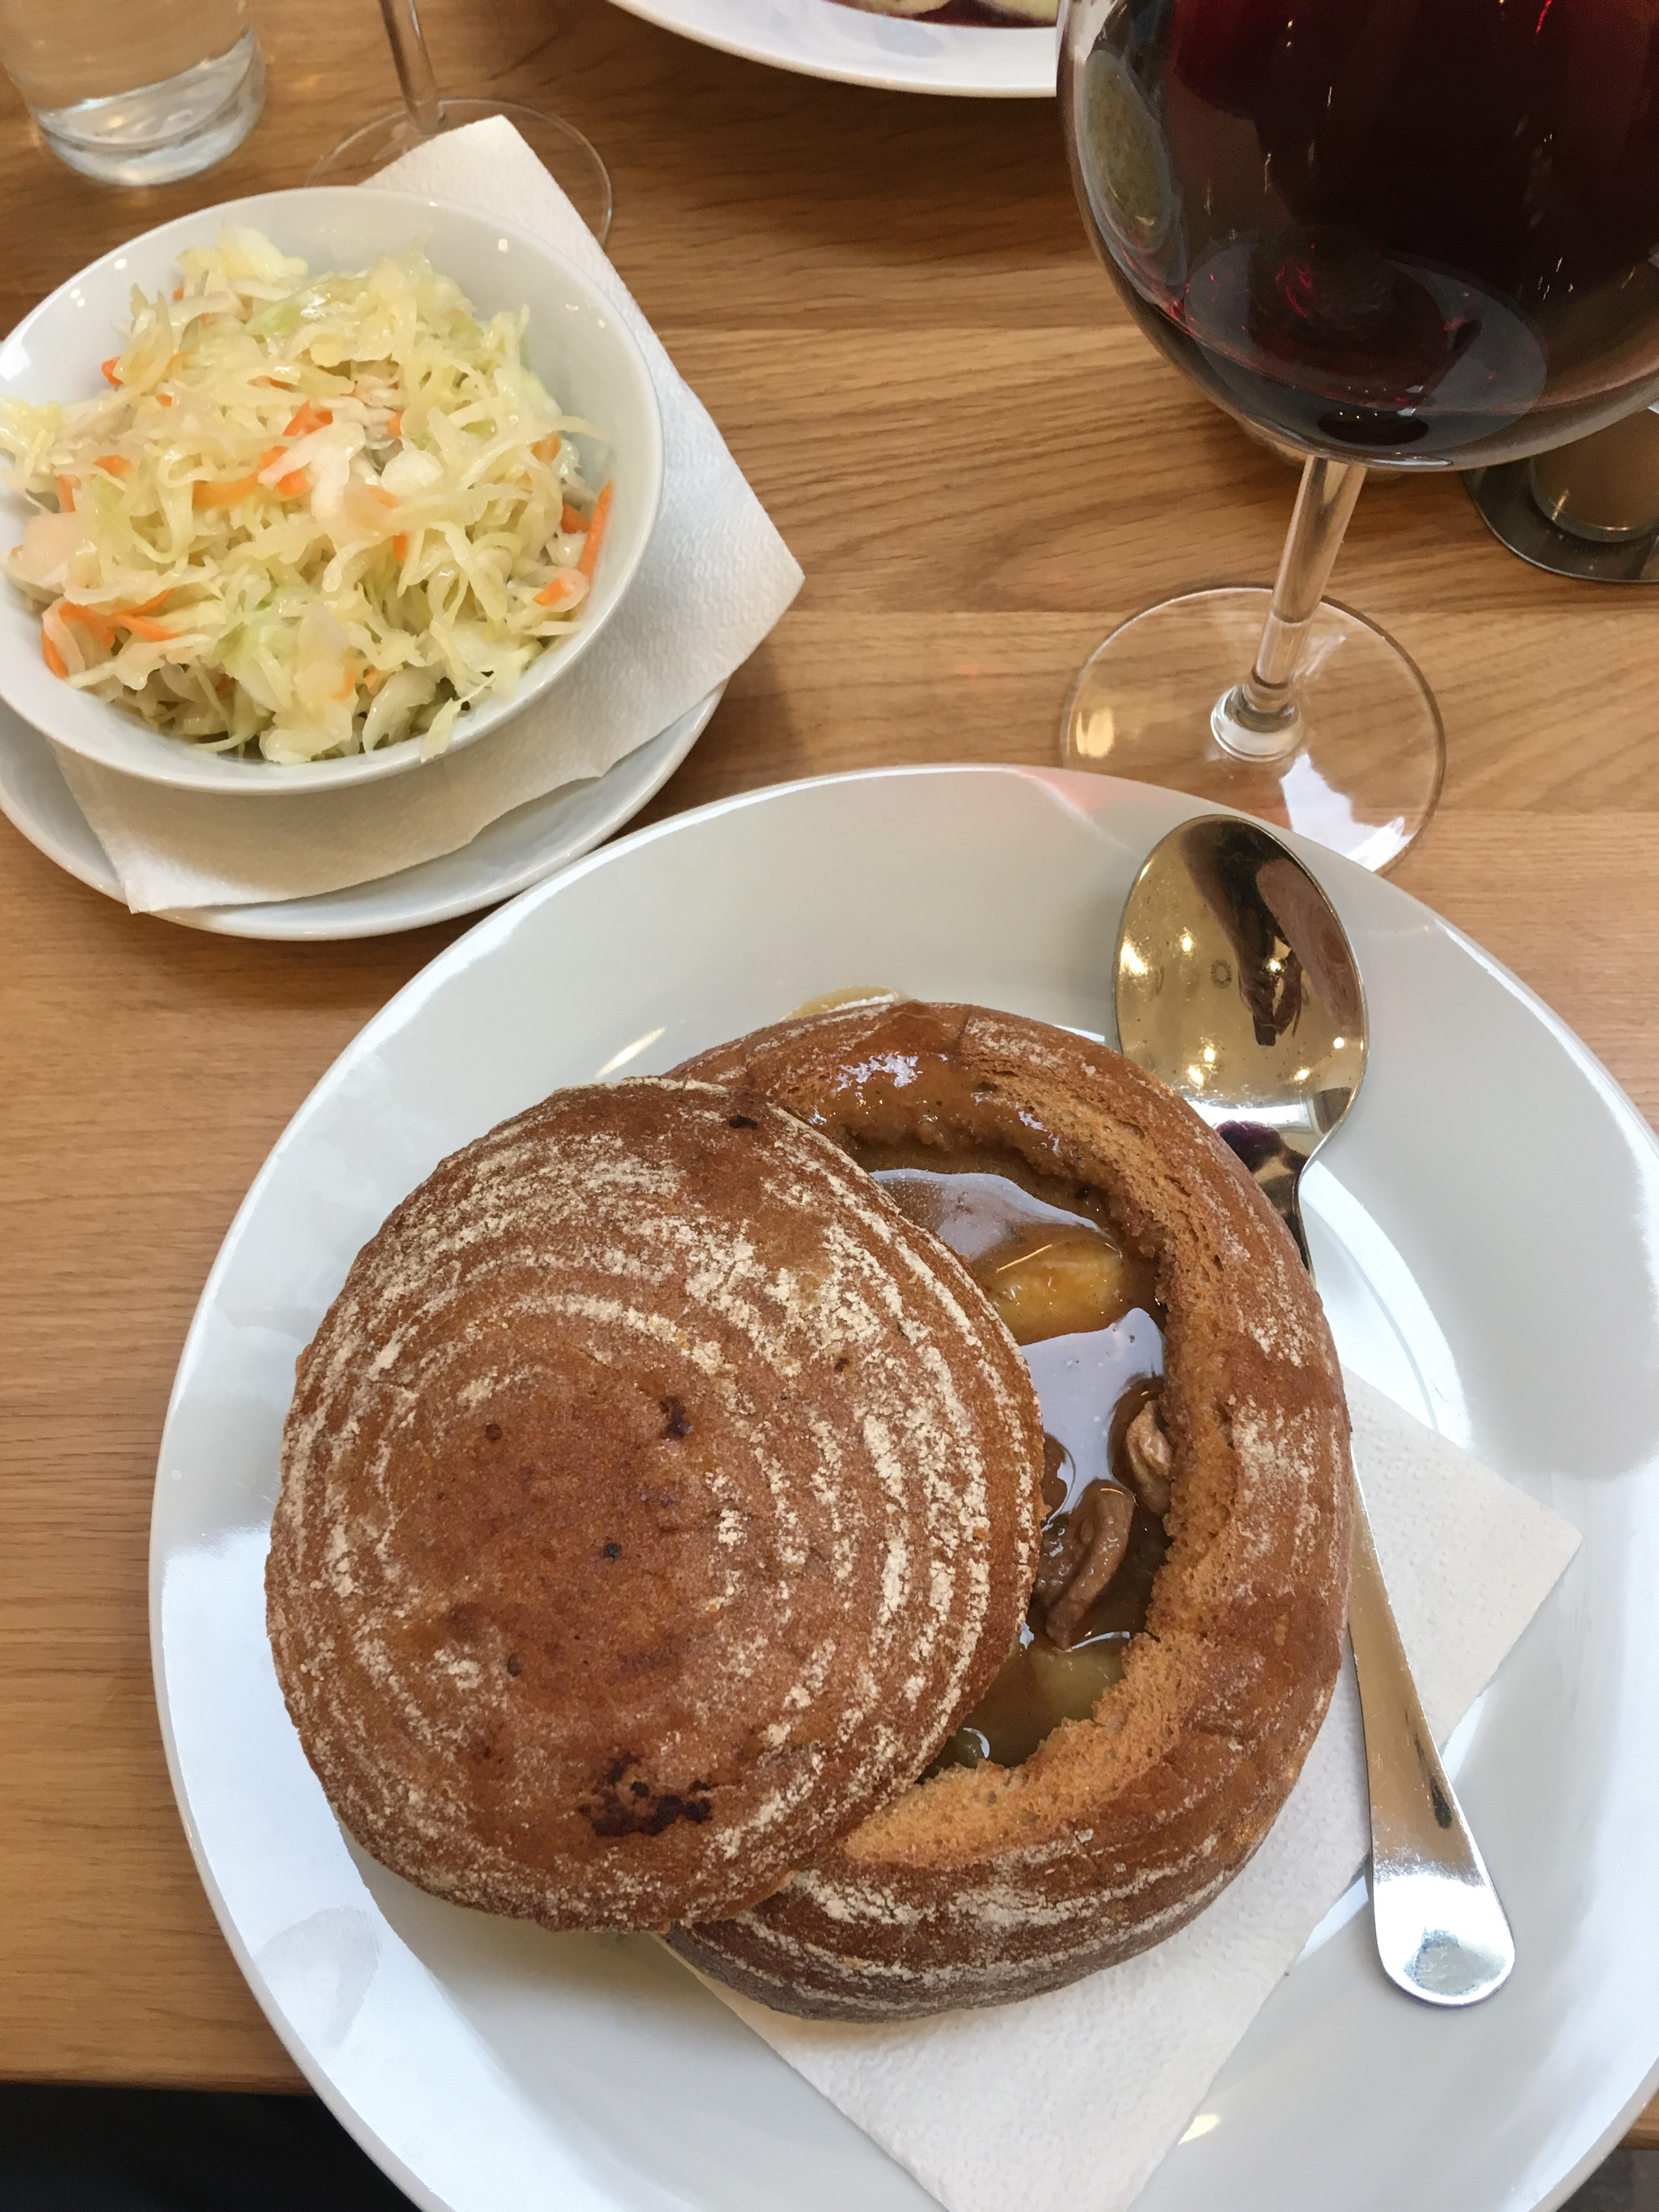 bread bowl with soup next to a side of coleslaw